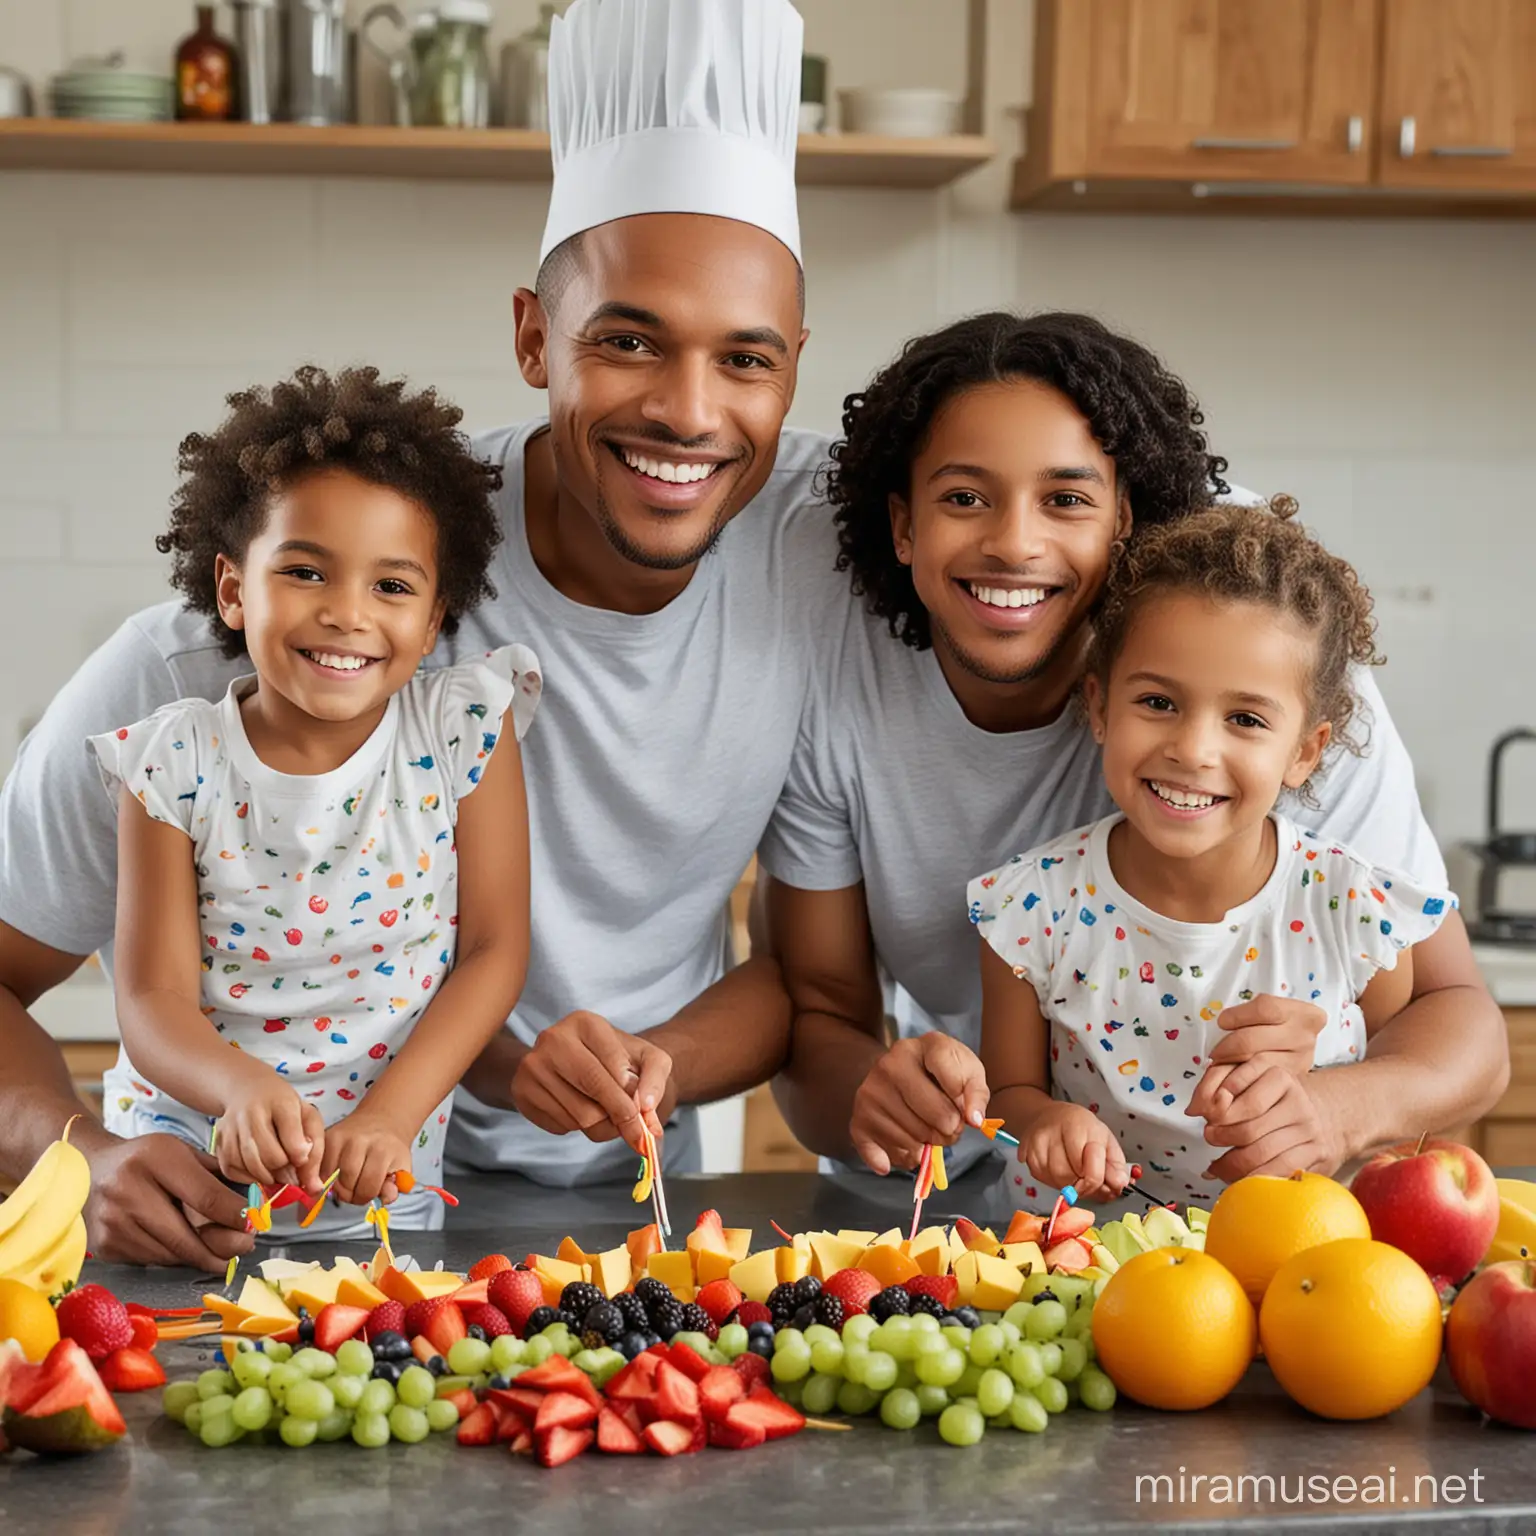 "A father and his children smile as they prepare colorful fruit skewers together in the kitchen. The vibrant array of fresh fruits on the counter reflects their commitment to healthy eating and making nutritious choices as a family."